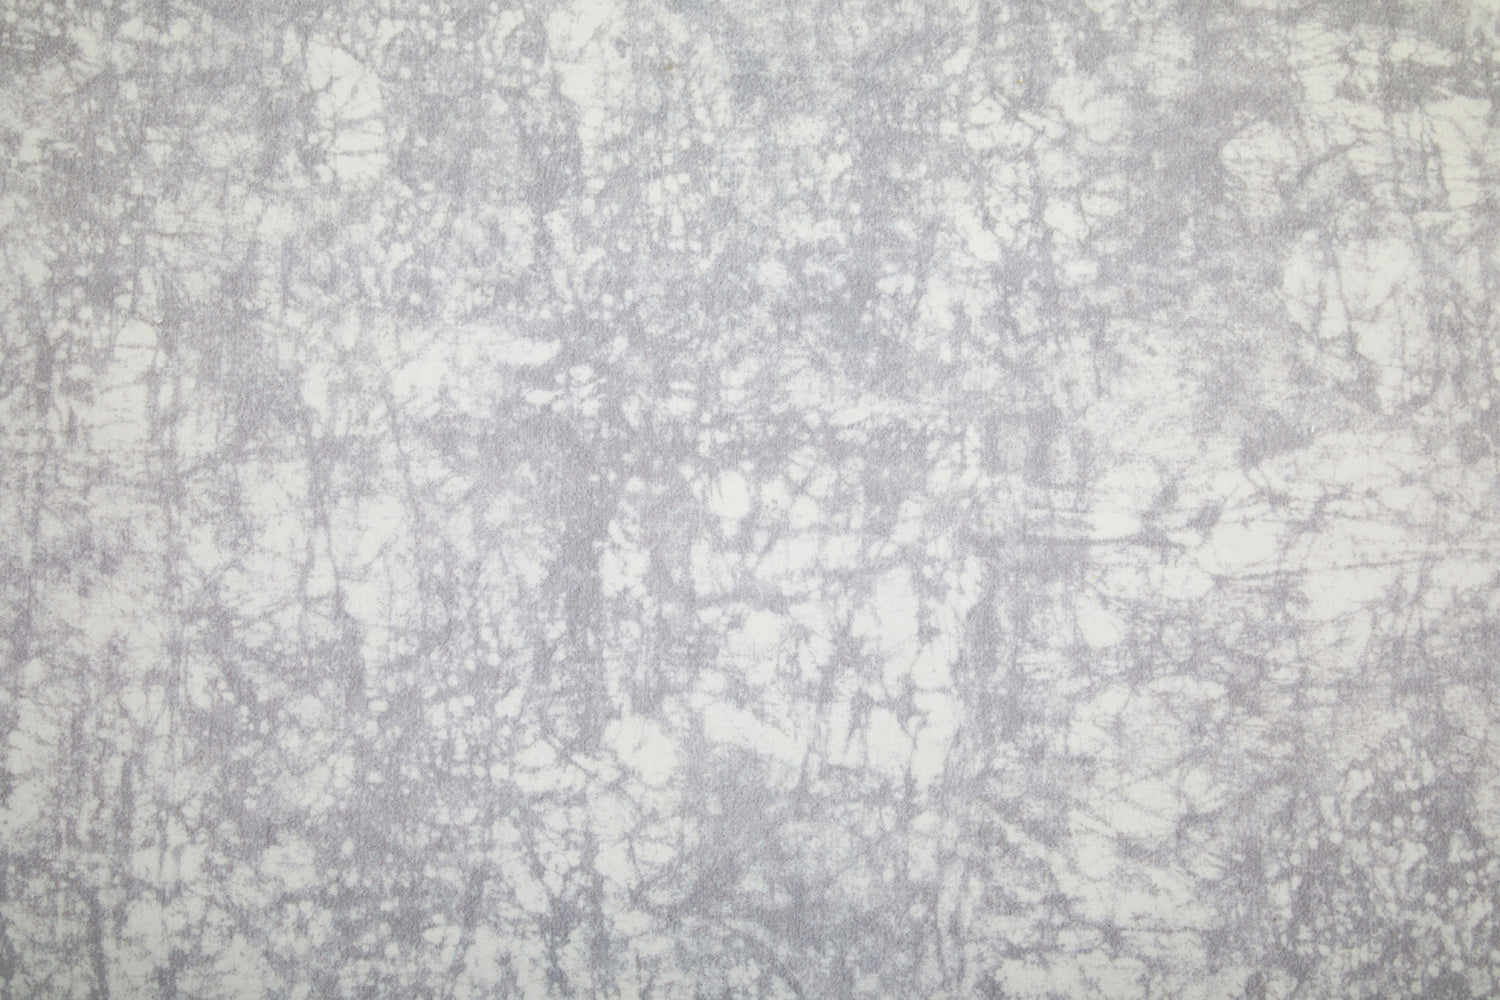 Detail of velvet fabric in an organic crumpled texture in light gray on a cream field.